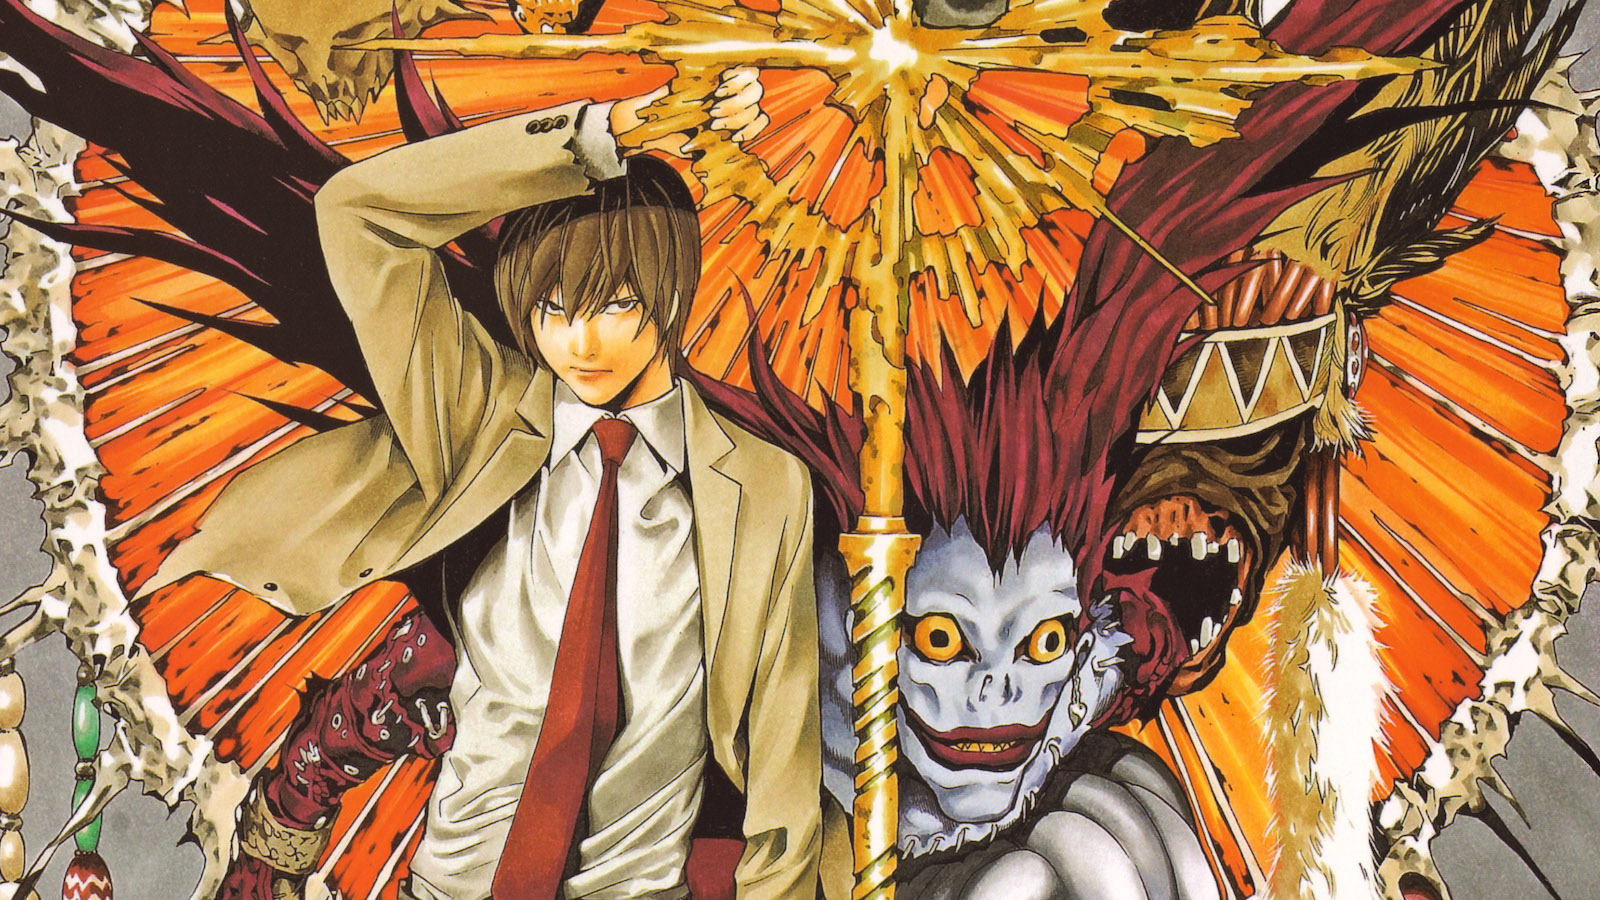 The Death Note Box Set Is On Sale So You'll Take This Manga And